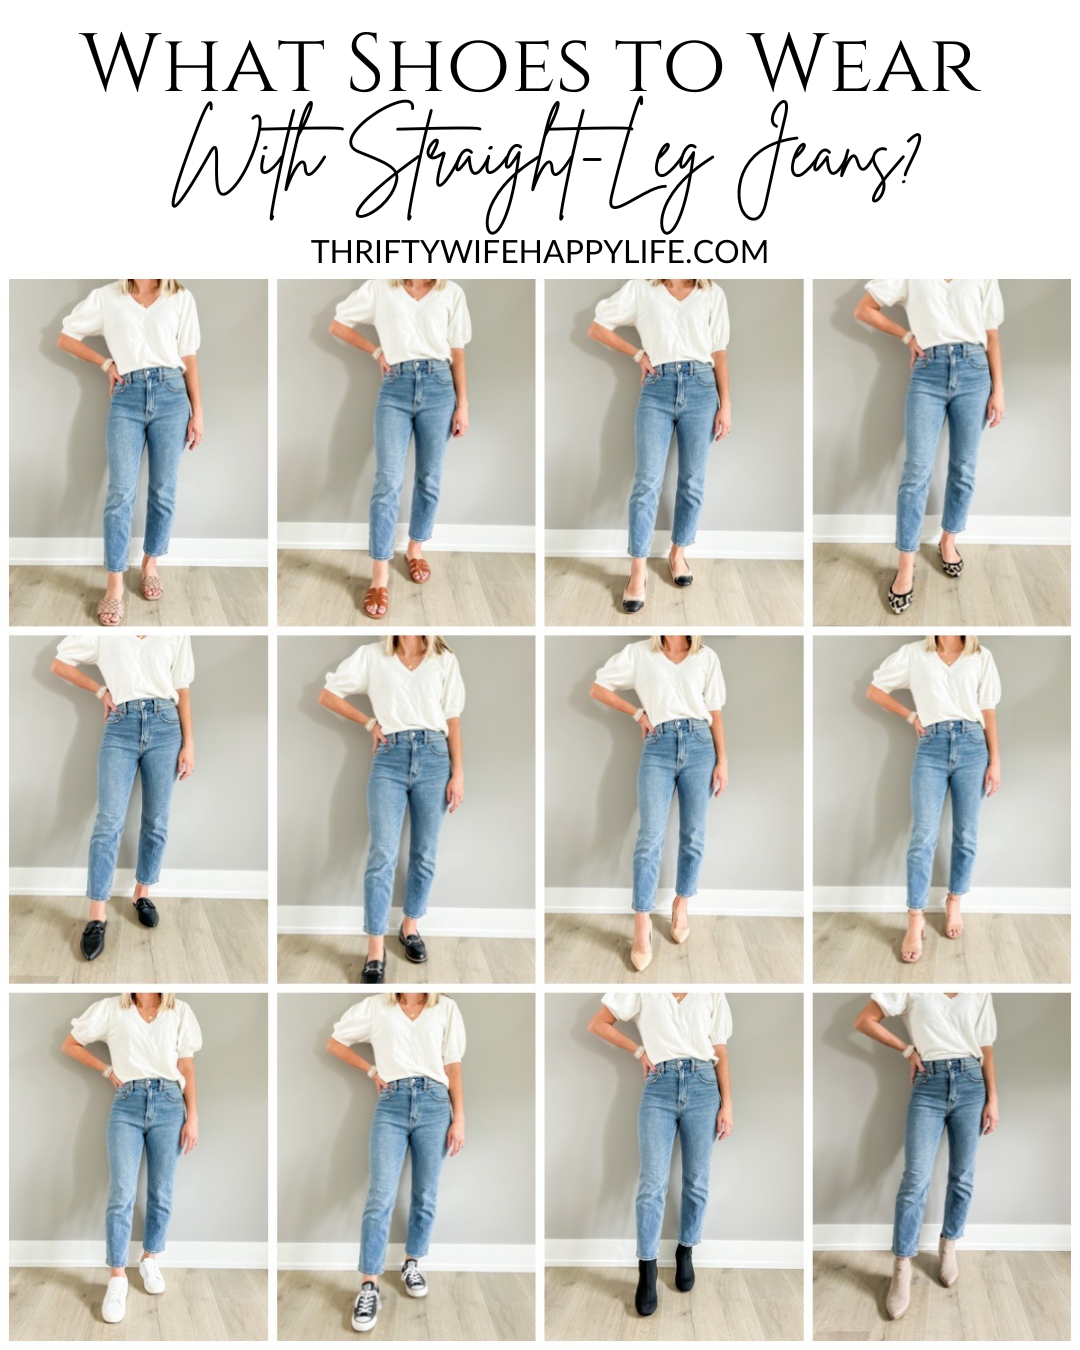 How to Style Straight-Leg Jeans in Winter - Thrifty Wife Happy Life